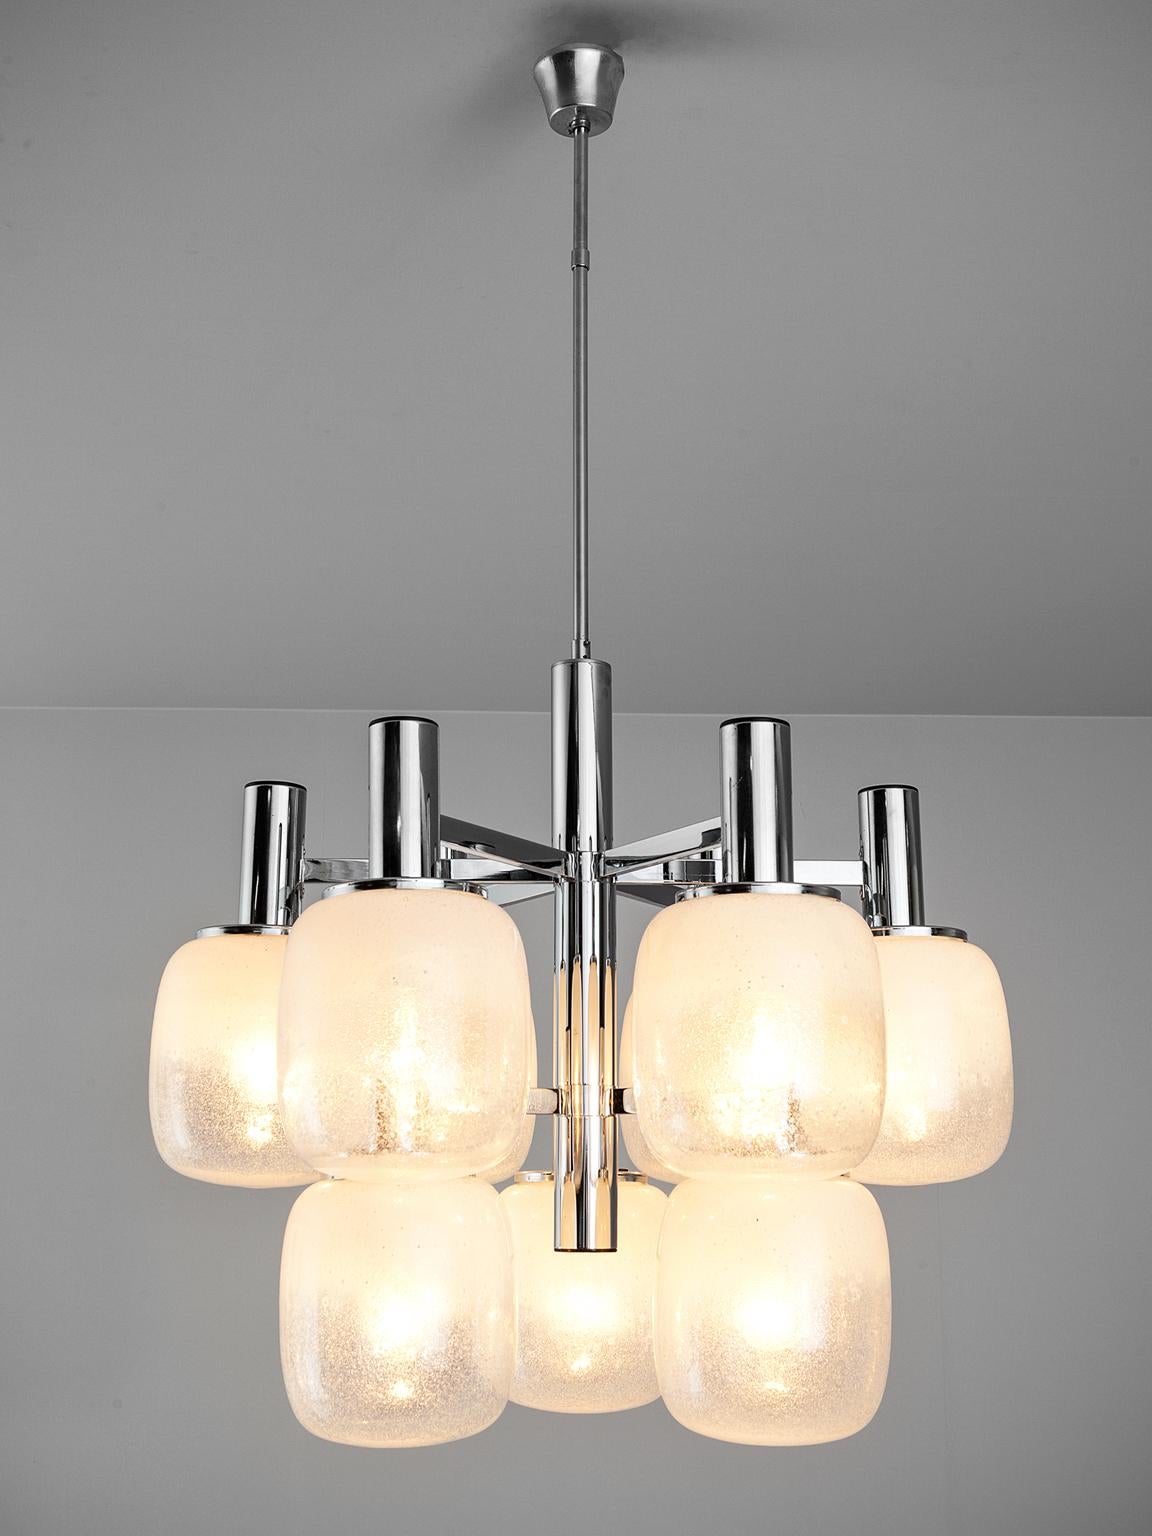 Mid-Century Modern Targetti Sankey Chandelier in Murano Glass and Chrome-Plated Steel  For Sale